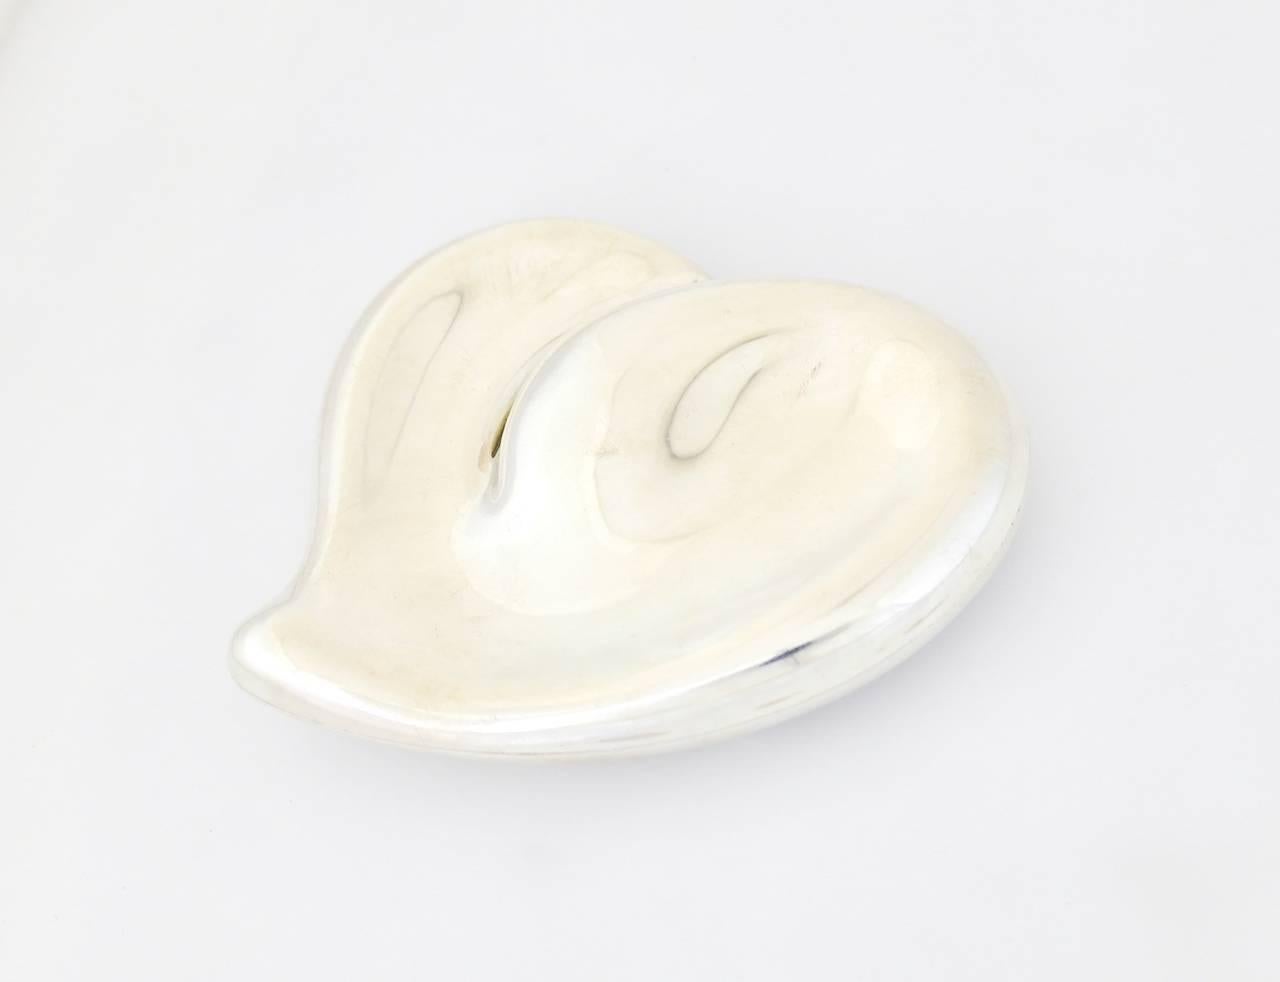 Being offered is a circa 1978 sterling silver belt buckle designed by Elsa Peretti for Tiffany & Co., comprising a figural modernist heart shaped form produced in Italy. Dimensions: 4" x 3 3/4" x 1/2". Marked as illustrated. In